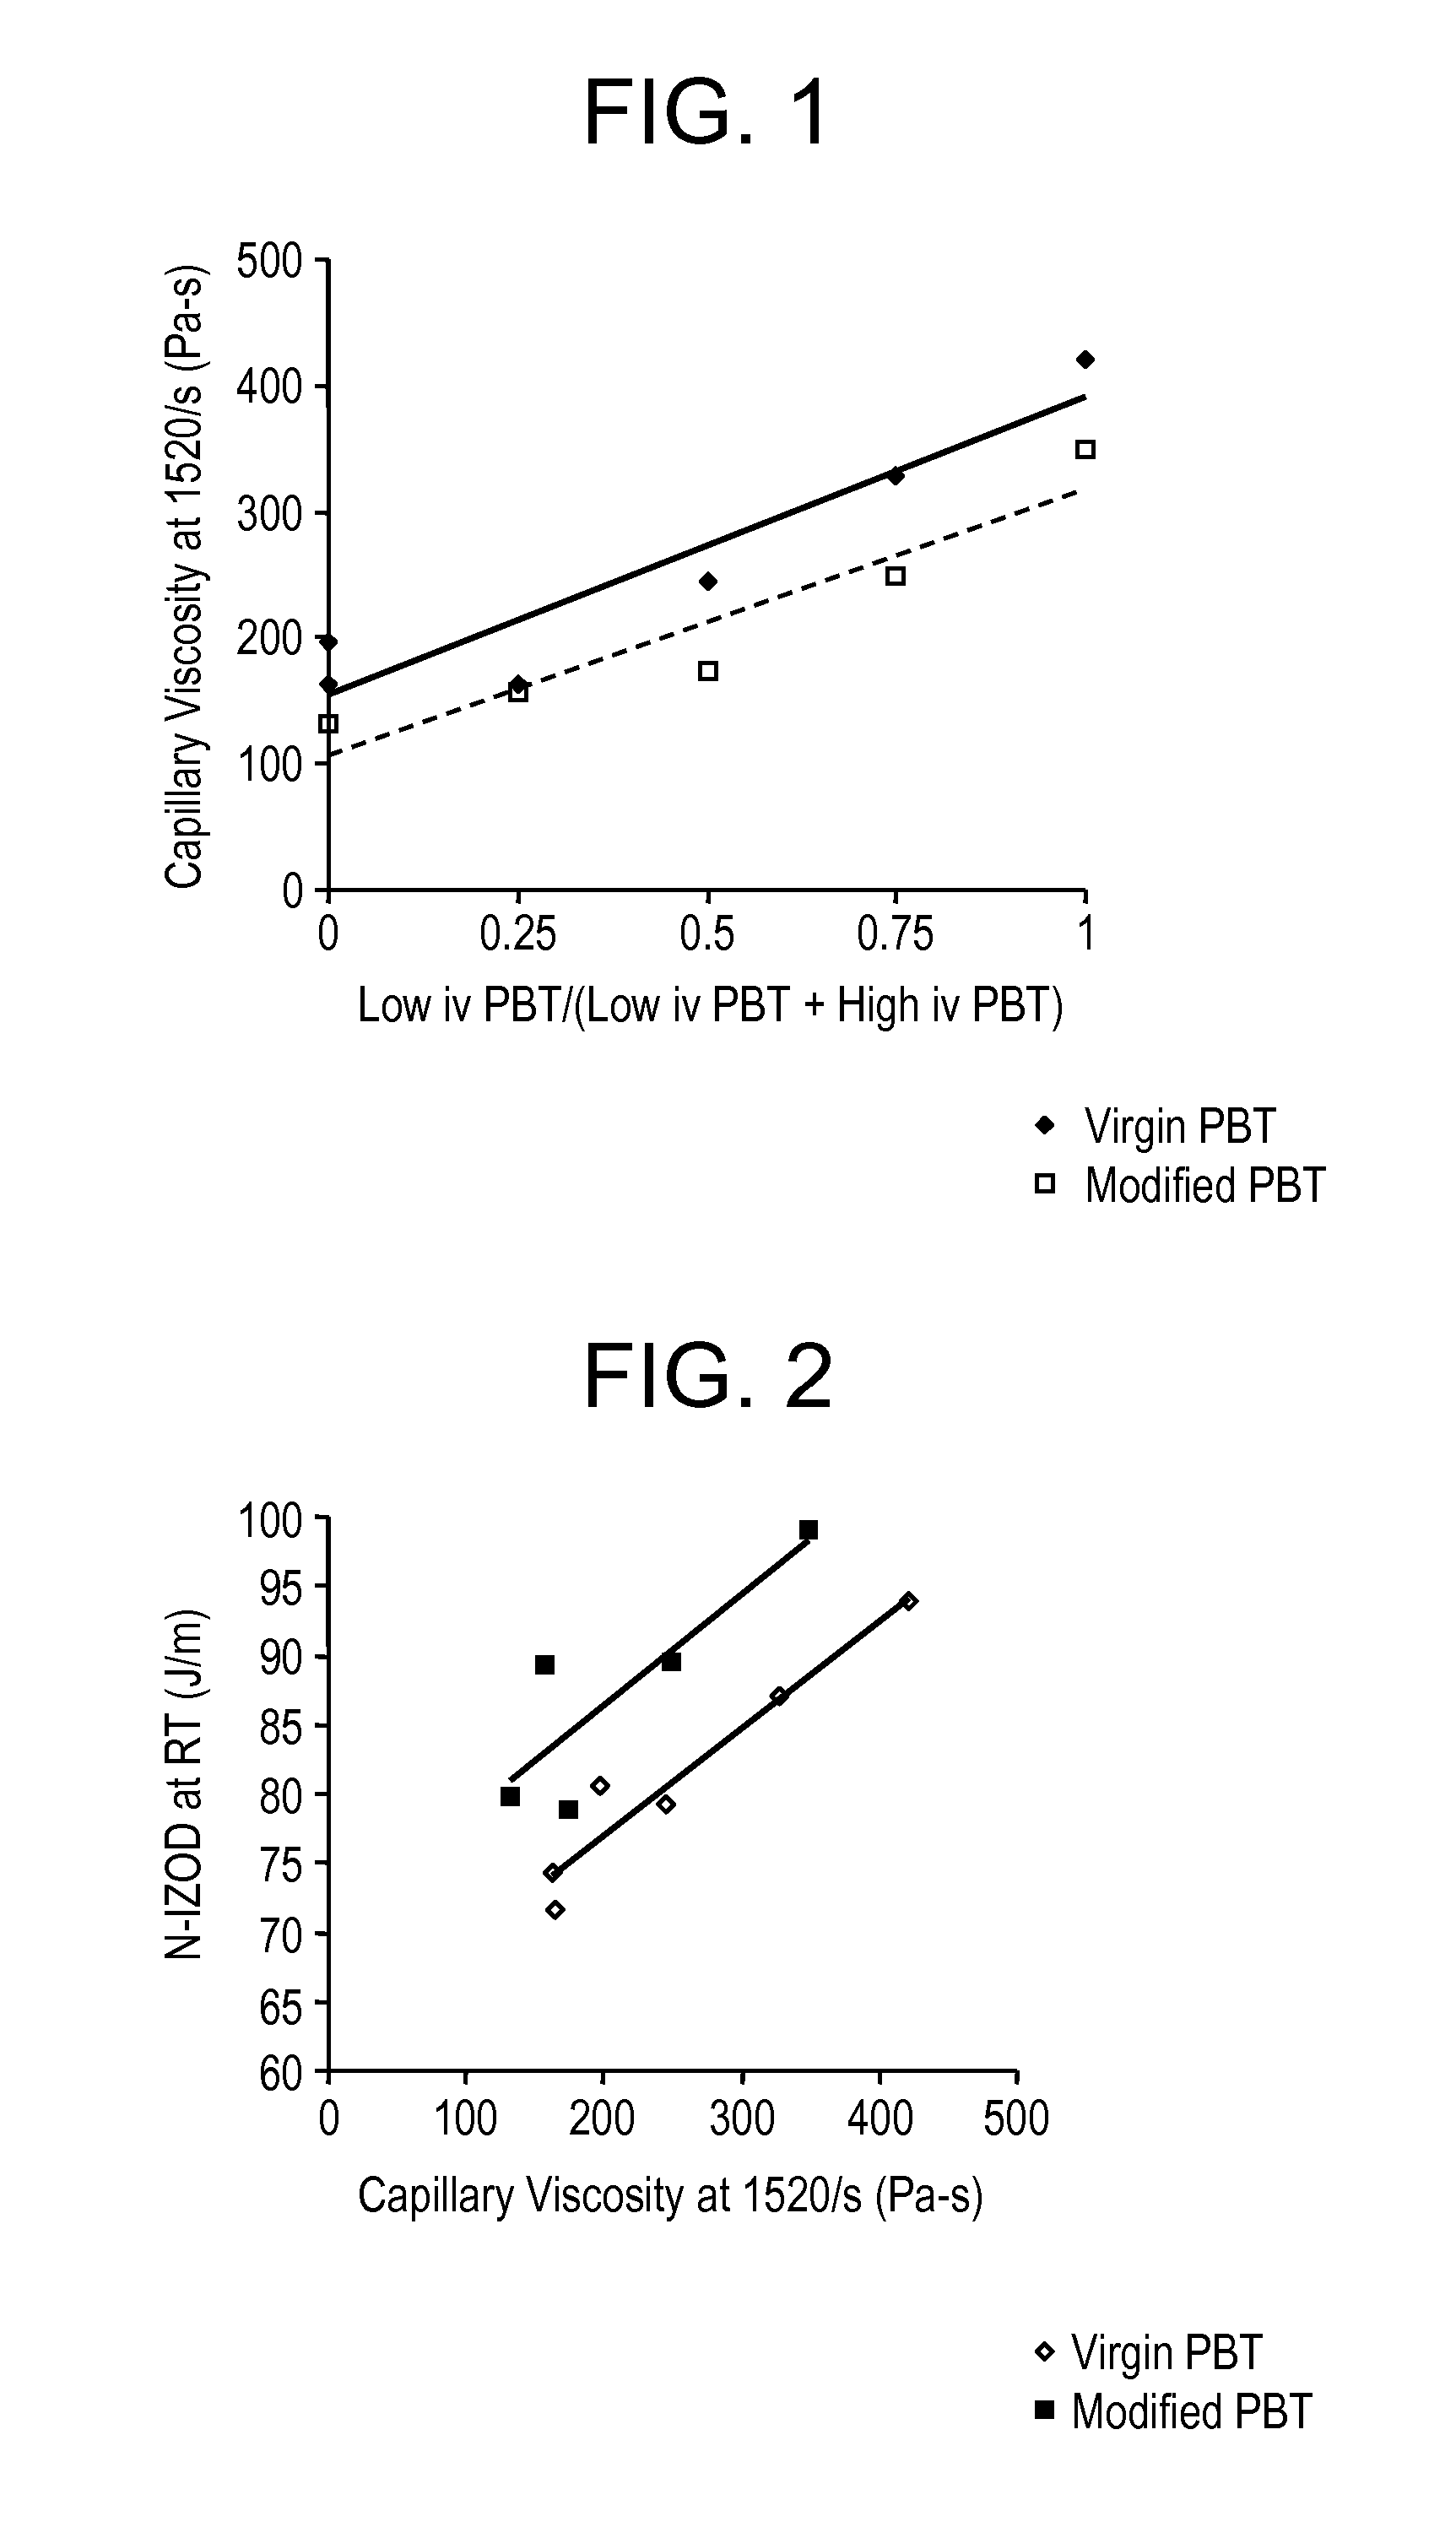 Molding compositions containing fillers and modified polybutylene terephthalate (PBT) random copolymers derived from polyethylene terephthalate (PET)